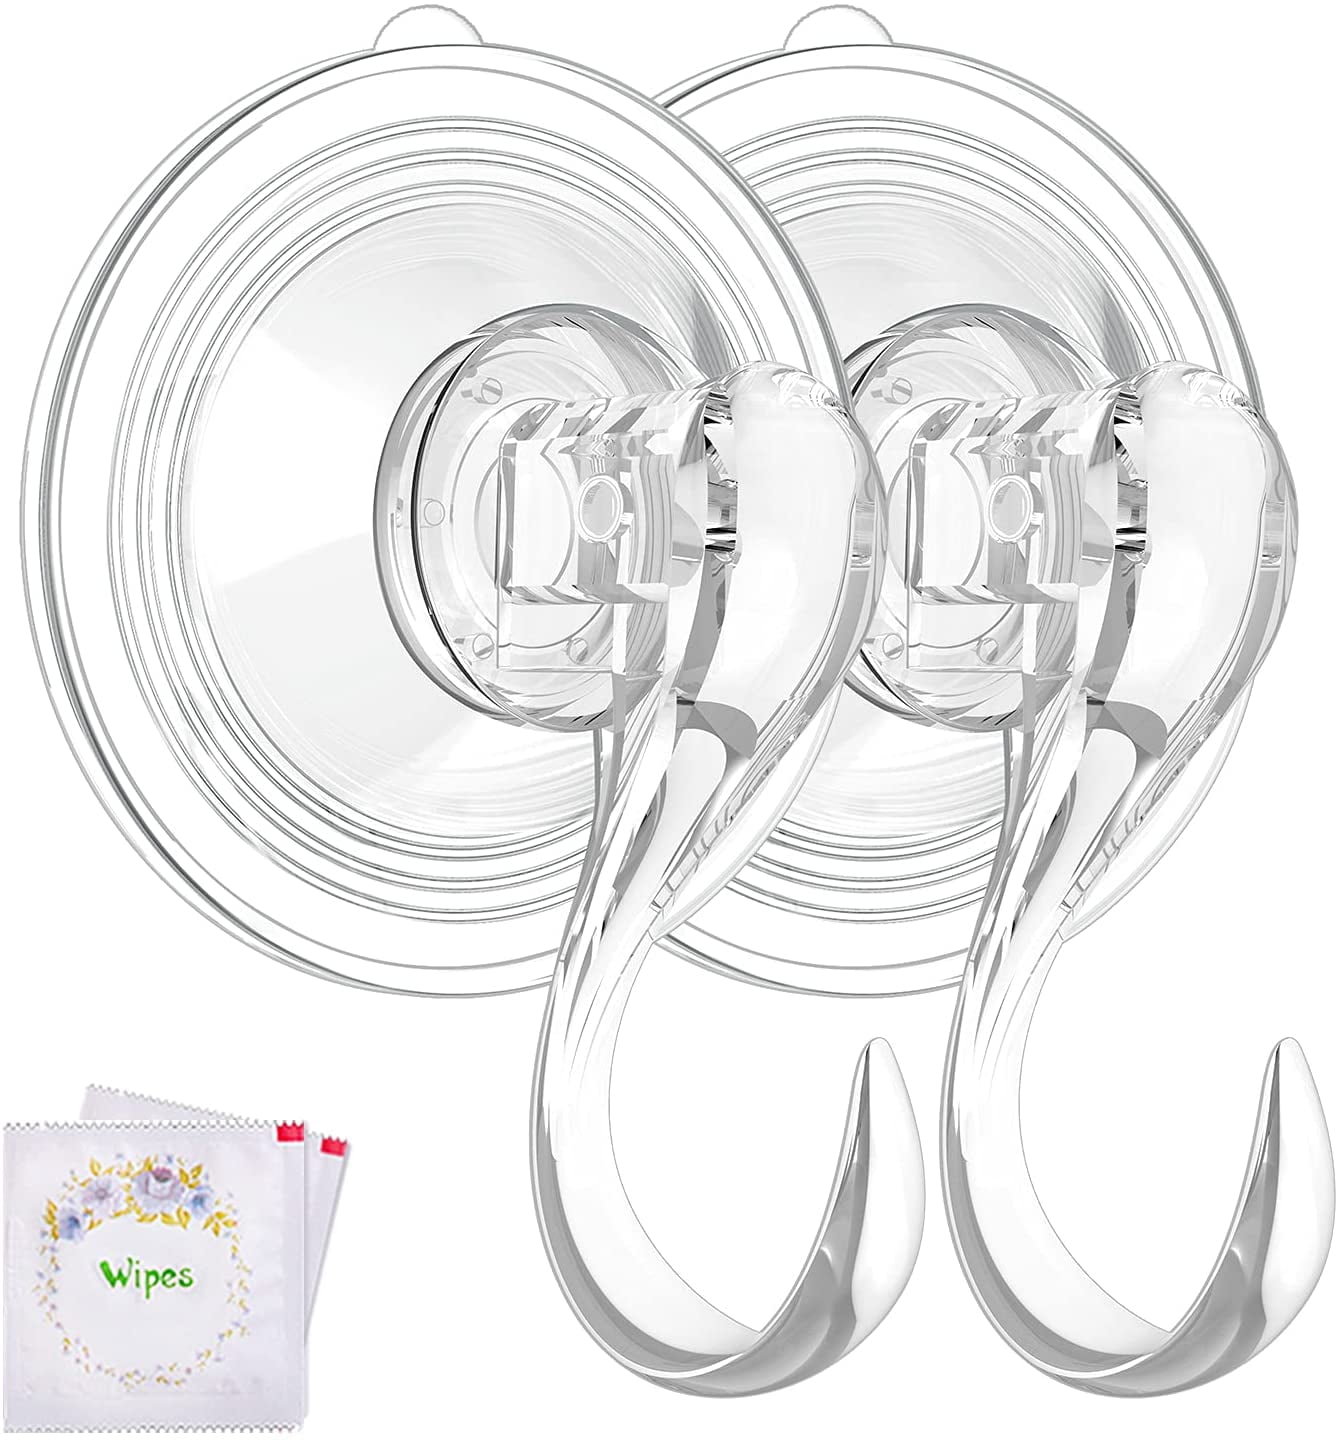 4 Packs VISV Wreath Hanger Clear Removable Large Heavy Duty Wreath Hanger Suction Cup with Cleaning Cloth 22 LB Window Glass Shower Suction Cup Hooks Wreath Holder for Wreath Christmas Decorations 